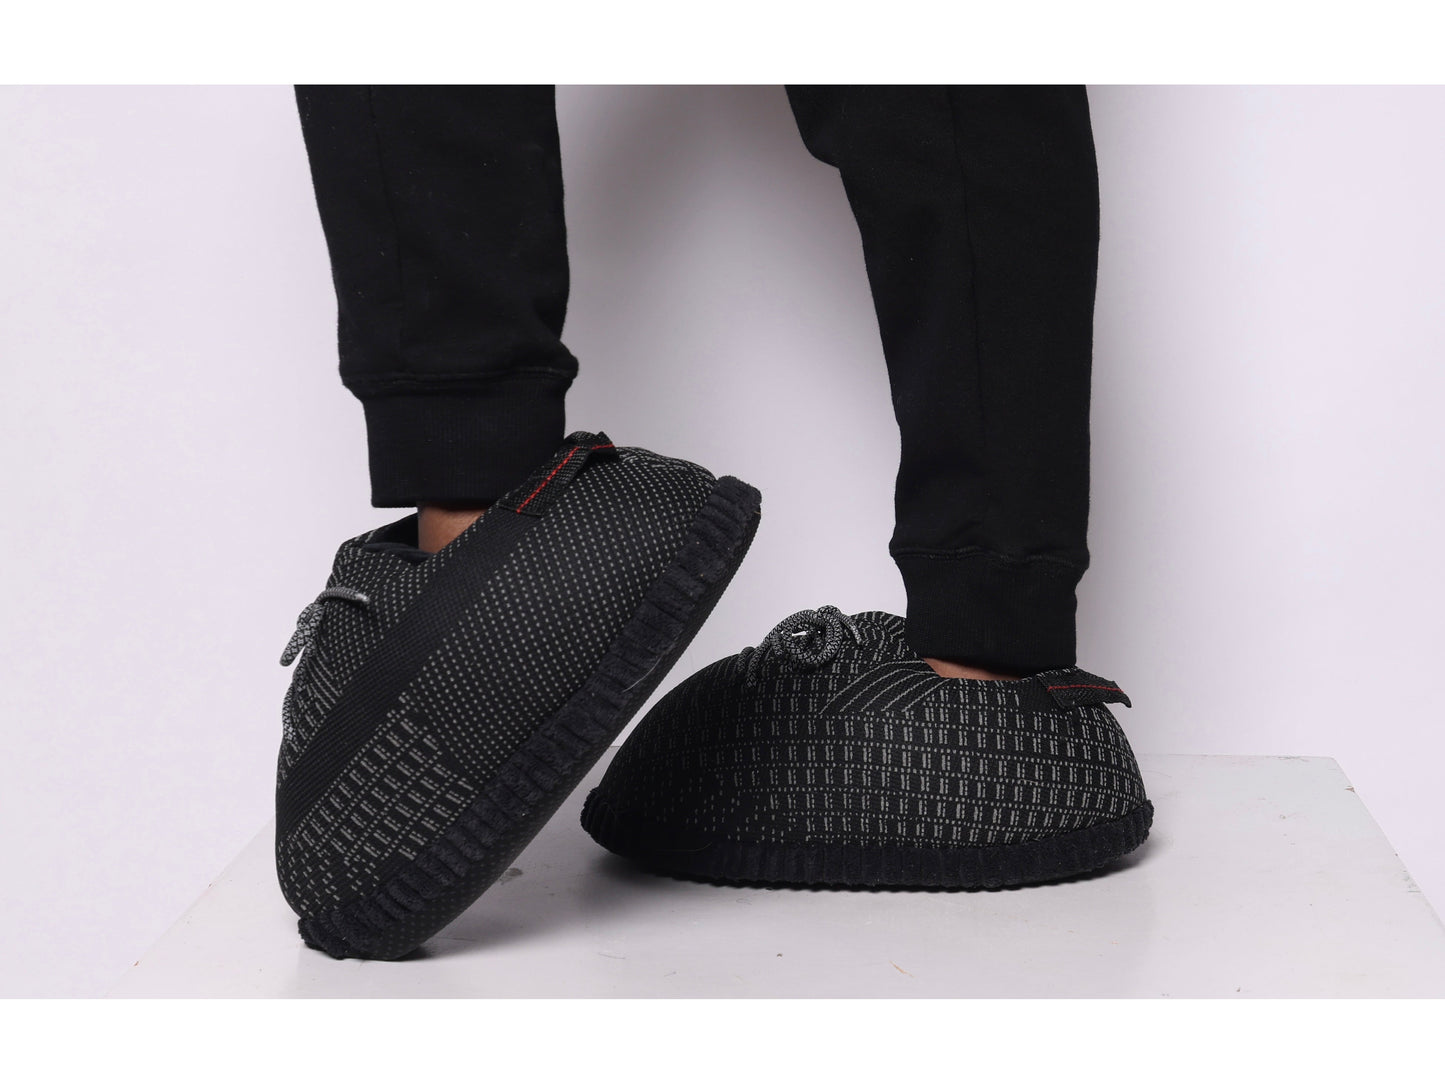 Short Sleeve Black Out T Shirt & Black Out Slipper Combo